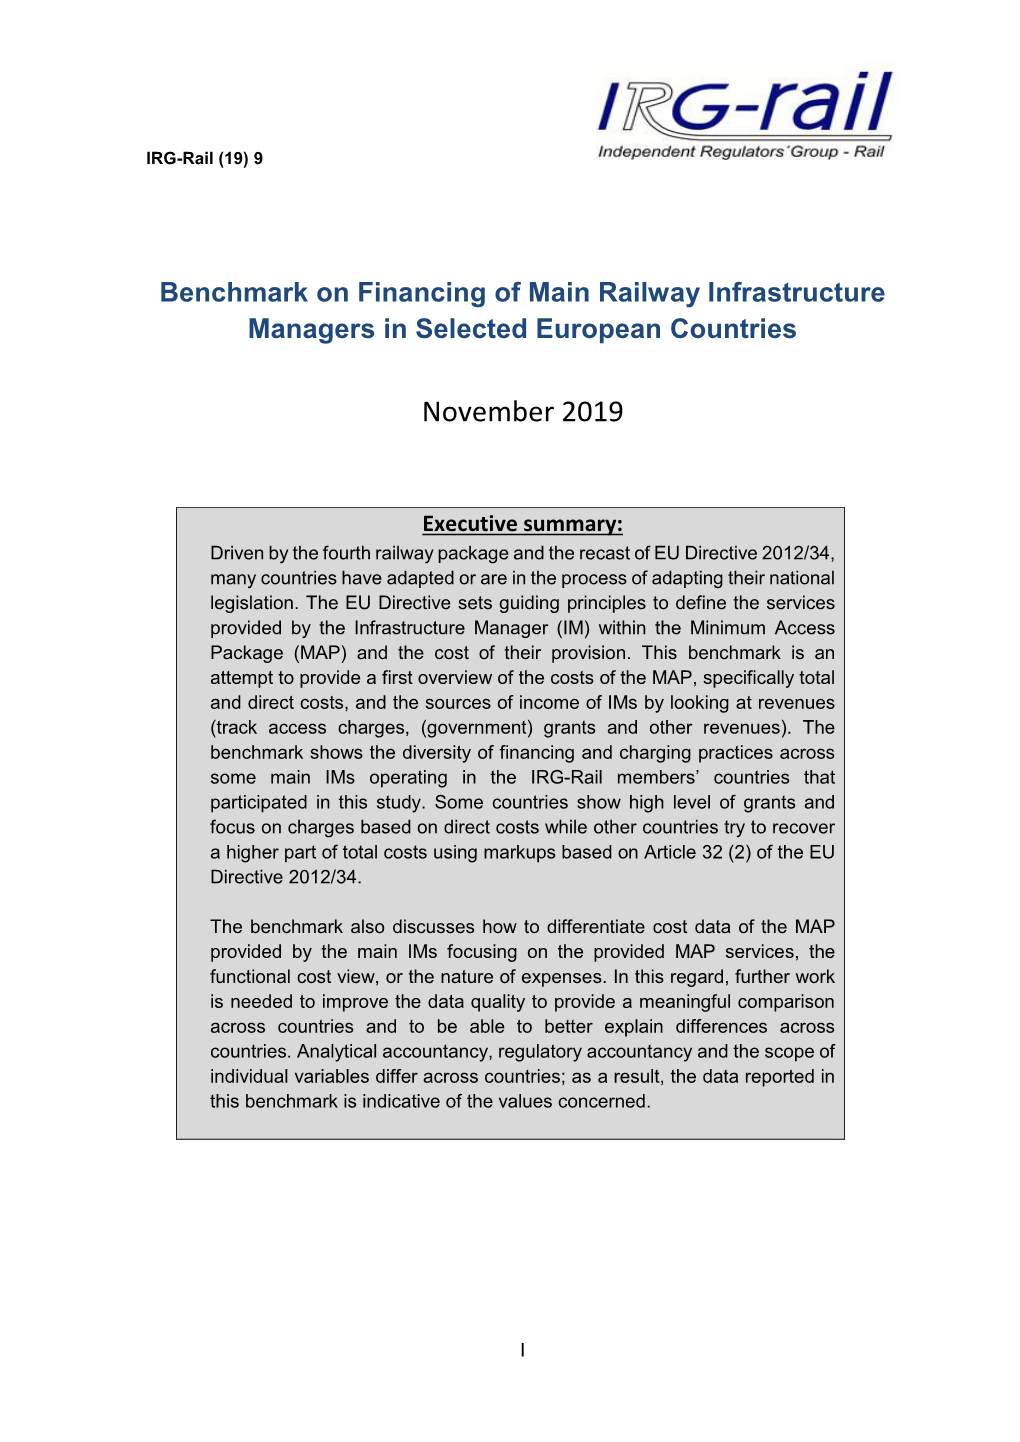 Benchmark on Financing of Main Railway Infrastructure Managers in Selected European Countries